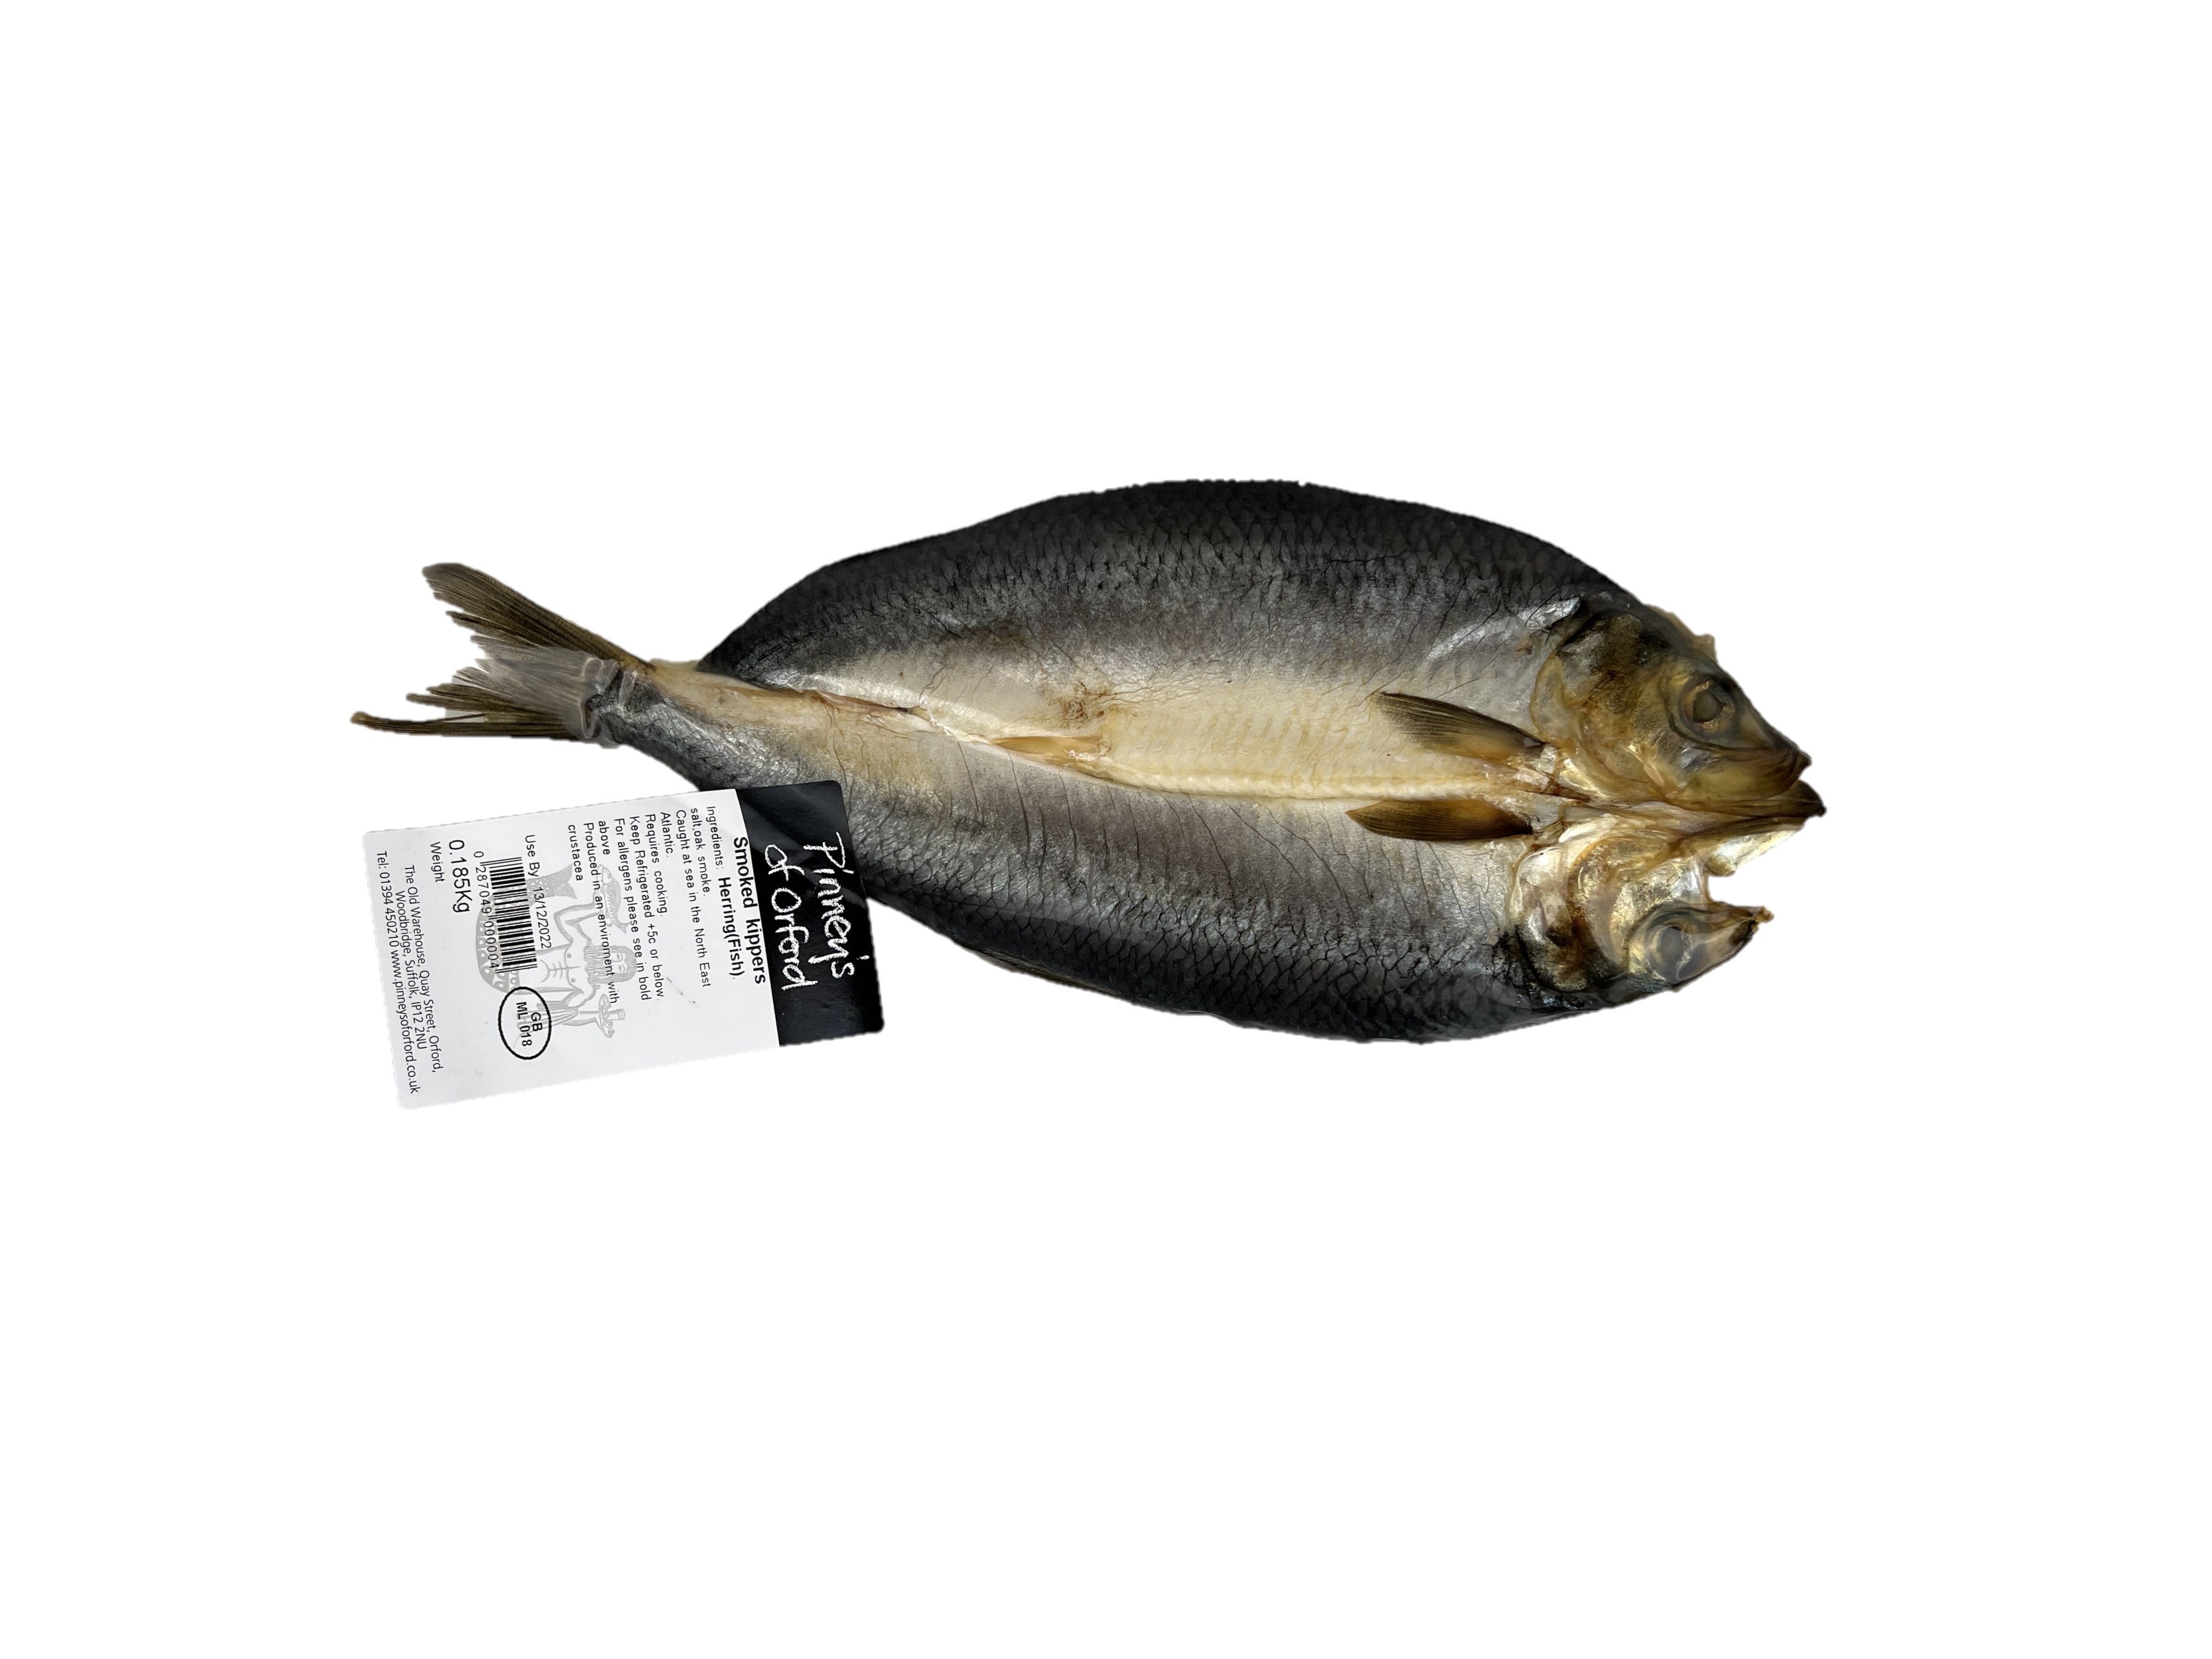 Smoked Kippers - Pinney's of Oxford approx 185g – Notting Hill